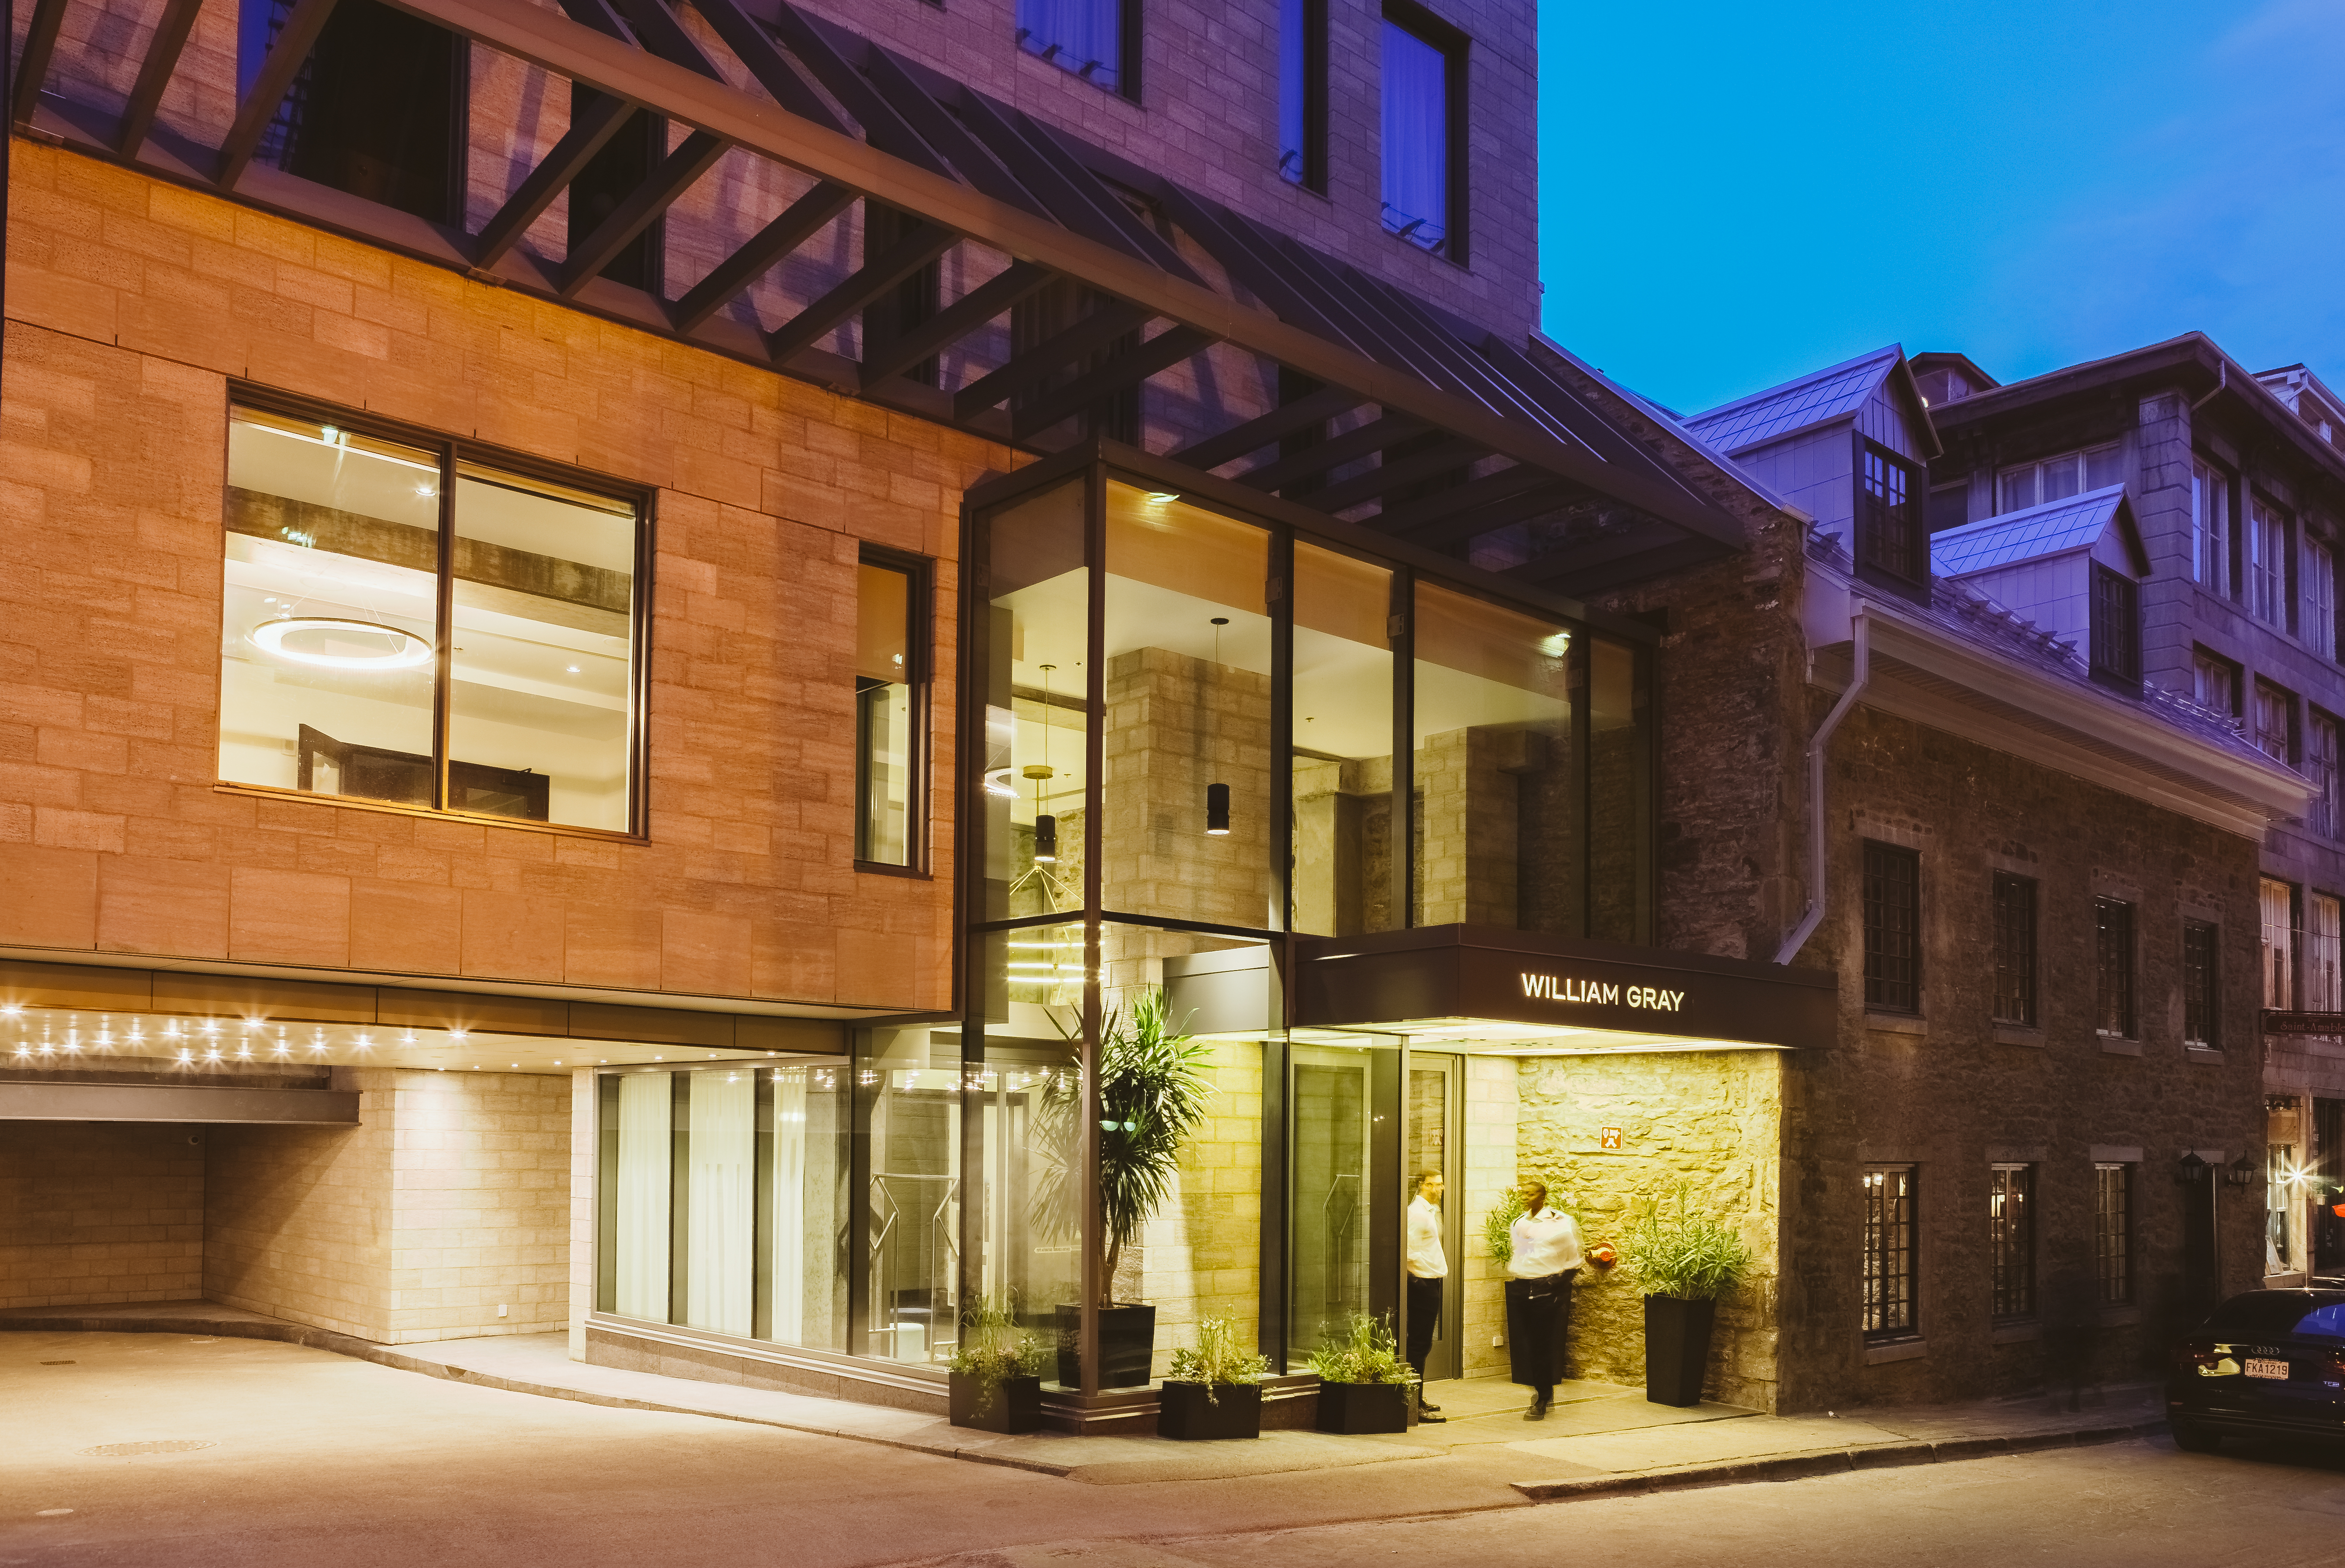 HARMAN Professional Solutions Delivers a Seamless Audio Experience at Montreal’s Hotel William Gray